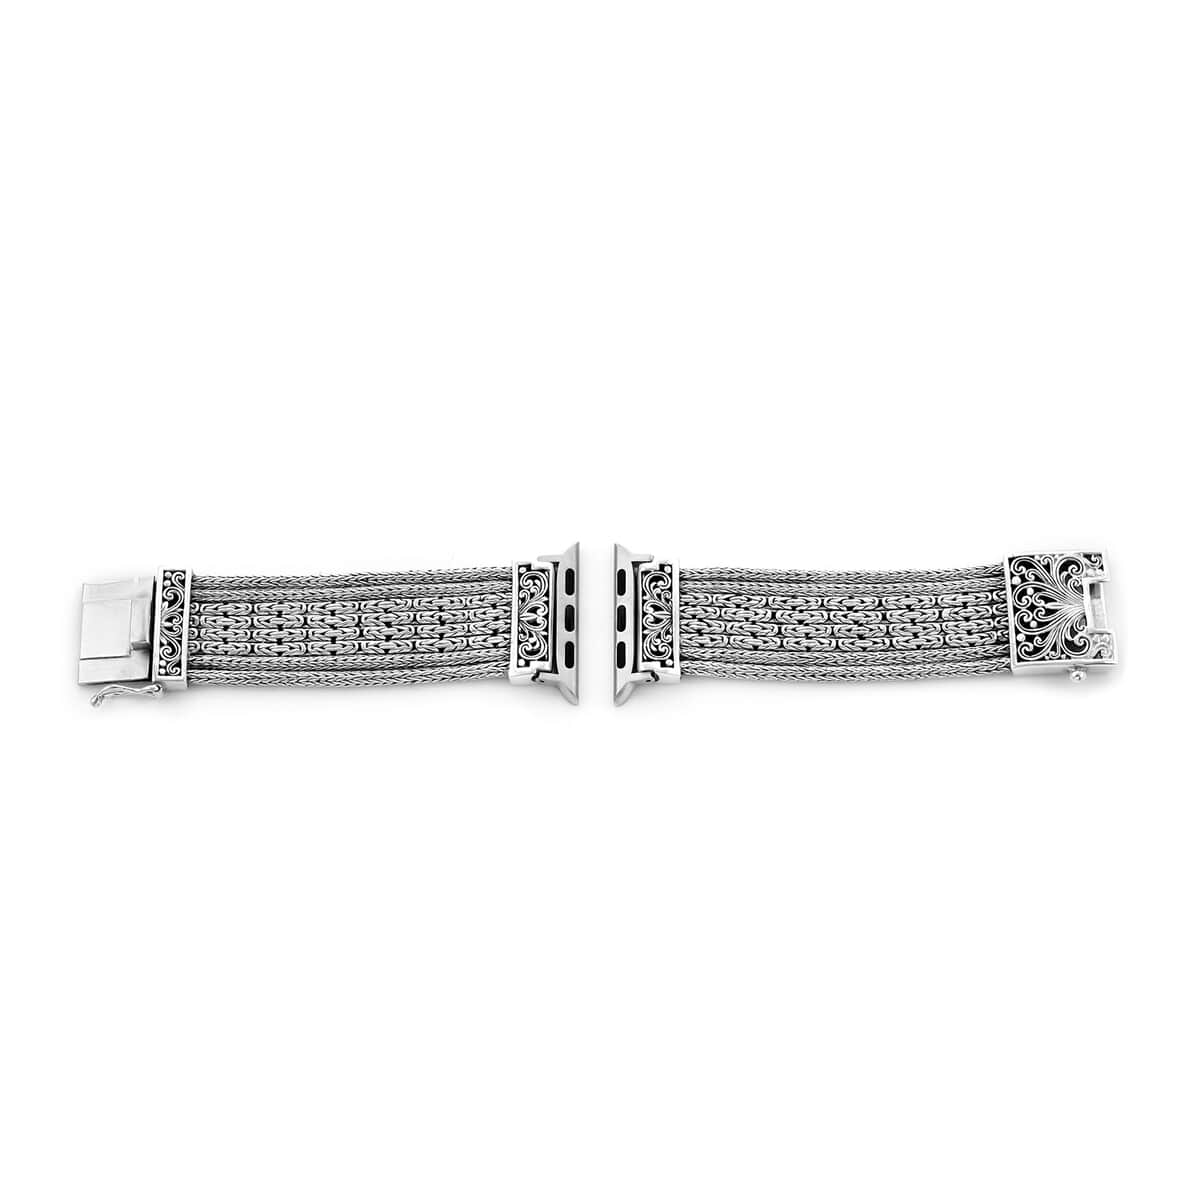 Bali Legacy Sterling Silver Weave Smart Watch Strap (8.00 In) (68.20 g) image number 2